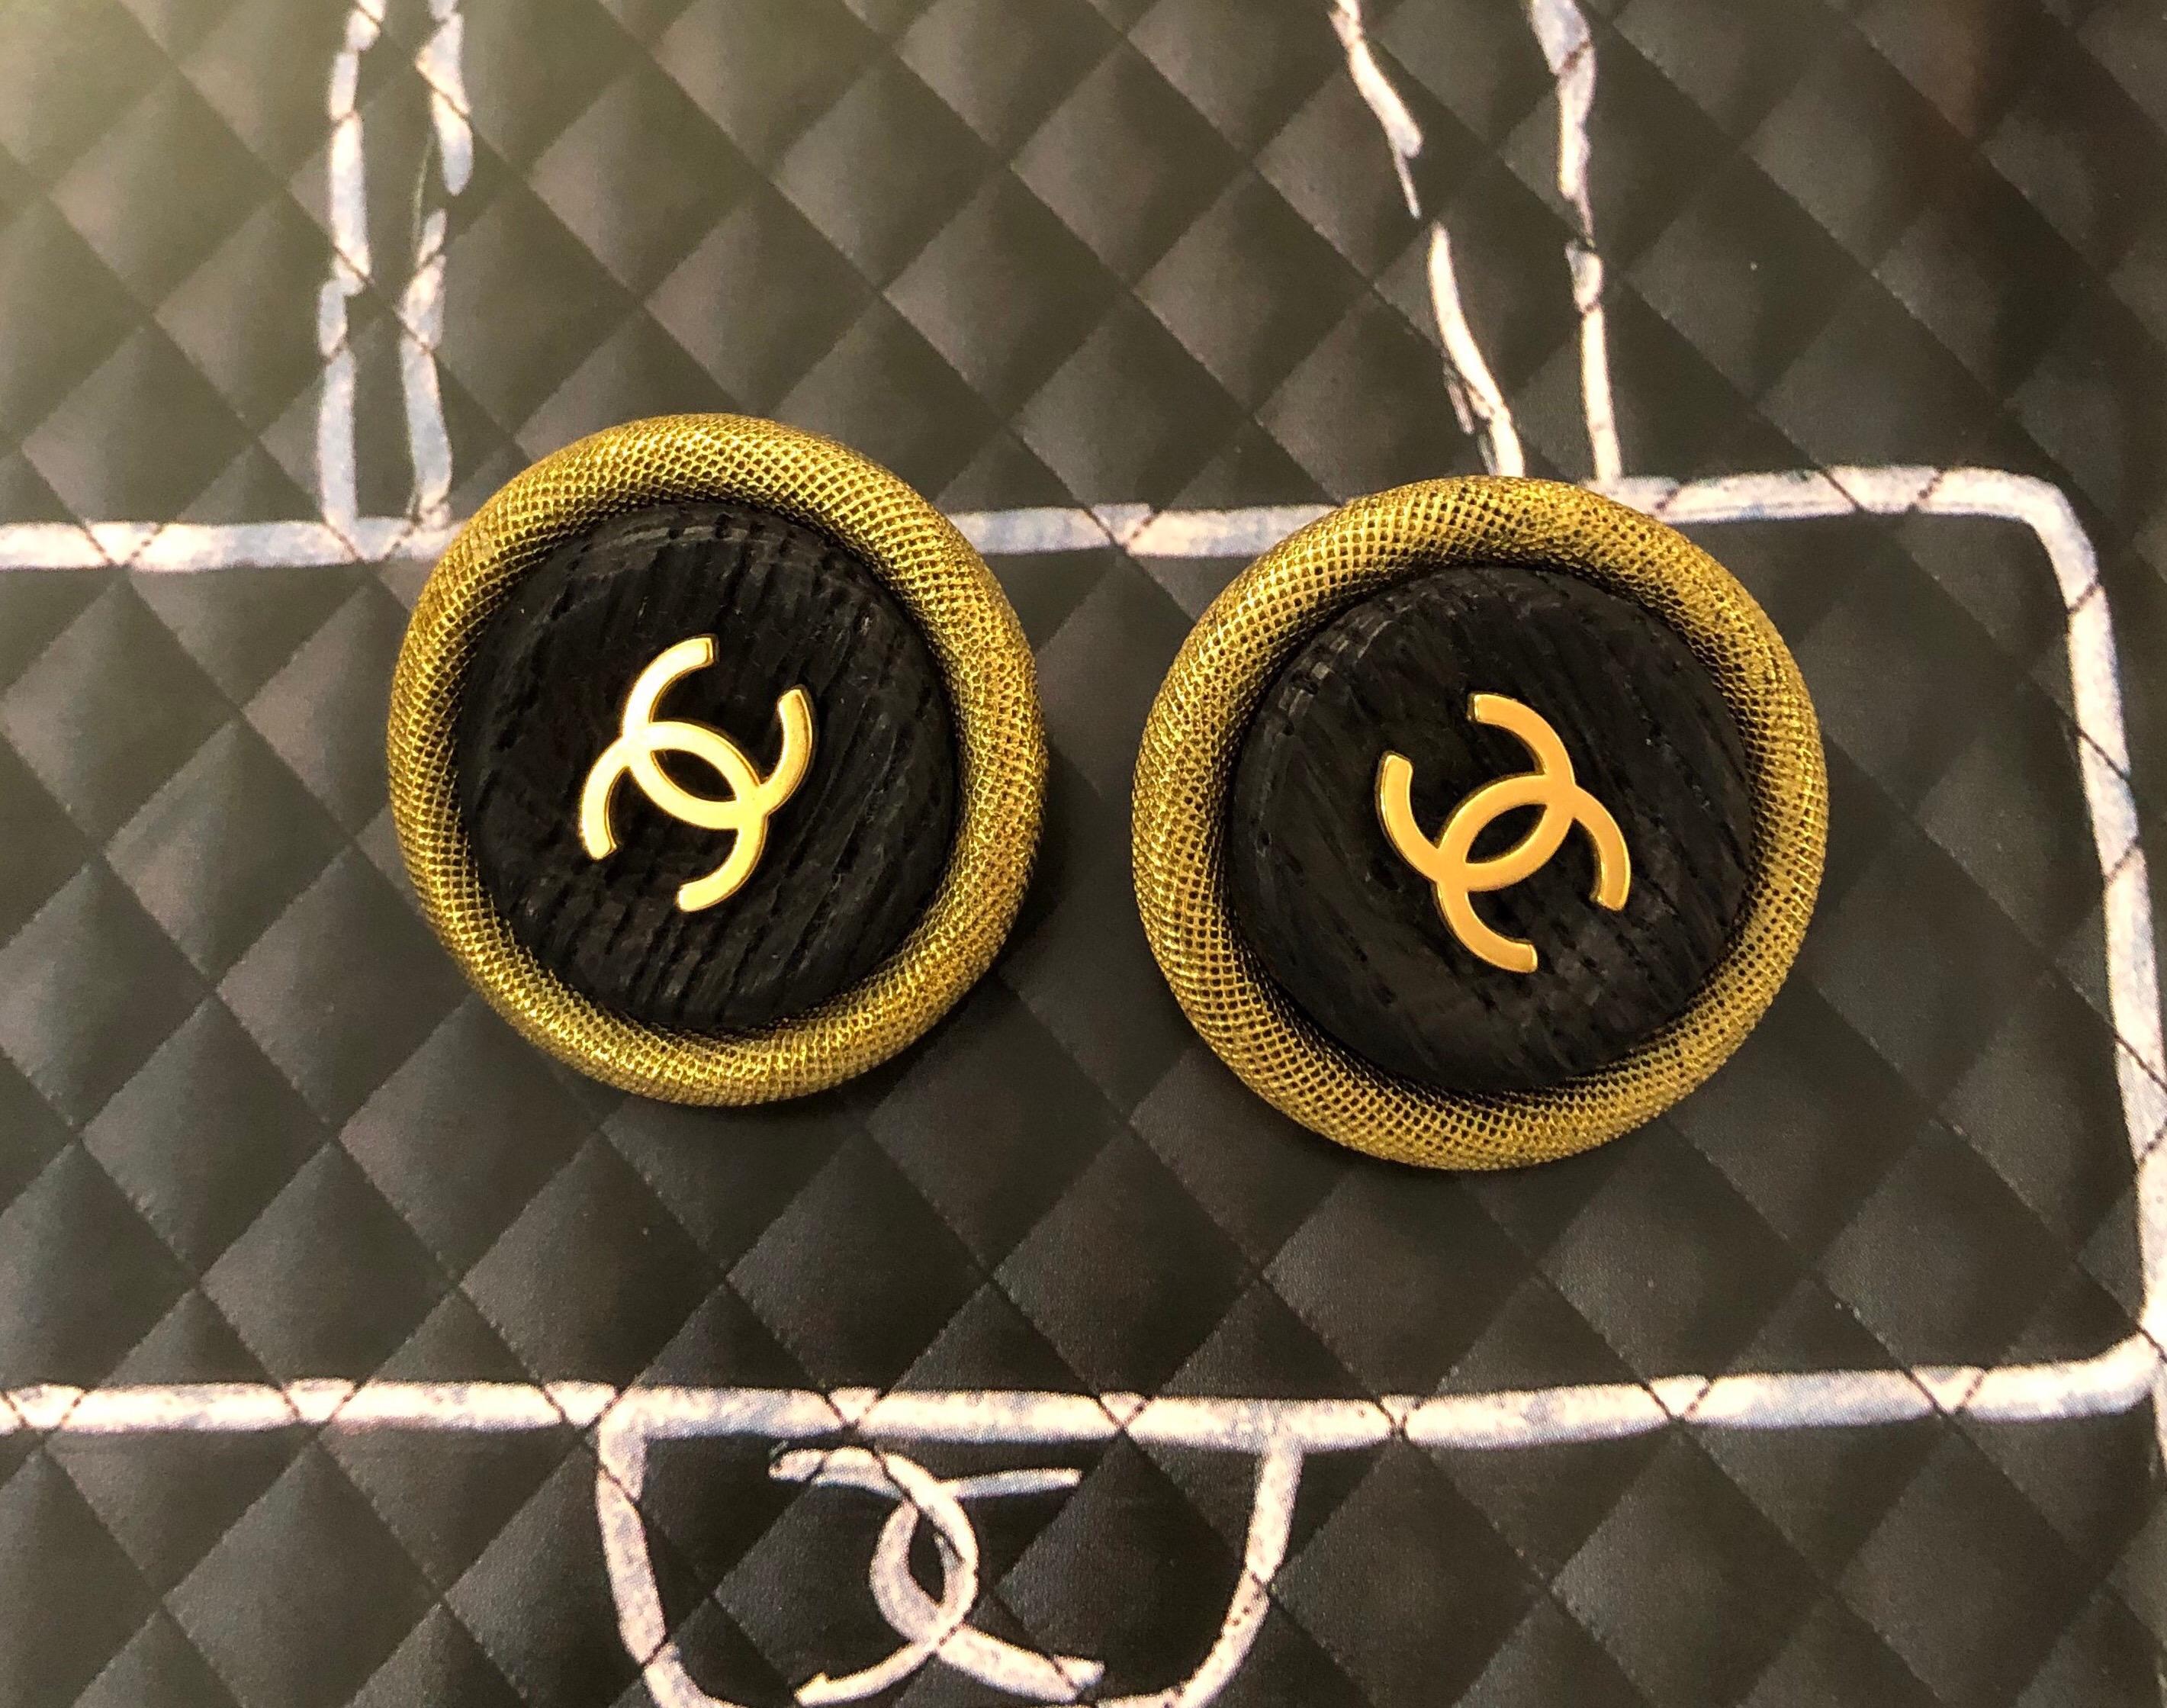 These 1994 vintage Chanel jumbo earclips are crafted of gold toned metal featuring a wood-textured resin base decorated with a gold toned CC at the centre. Measure approximately 3.5 cm. Stamped Chanel 94P, made in France. Come with box. 

Condition: